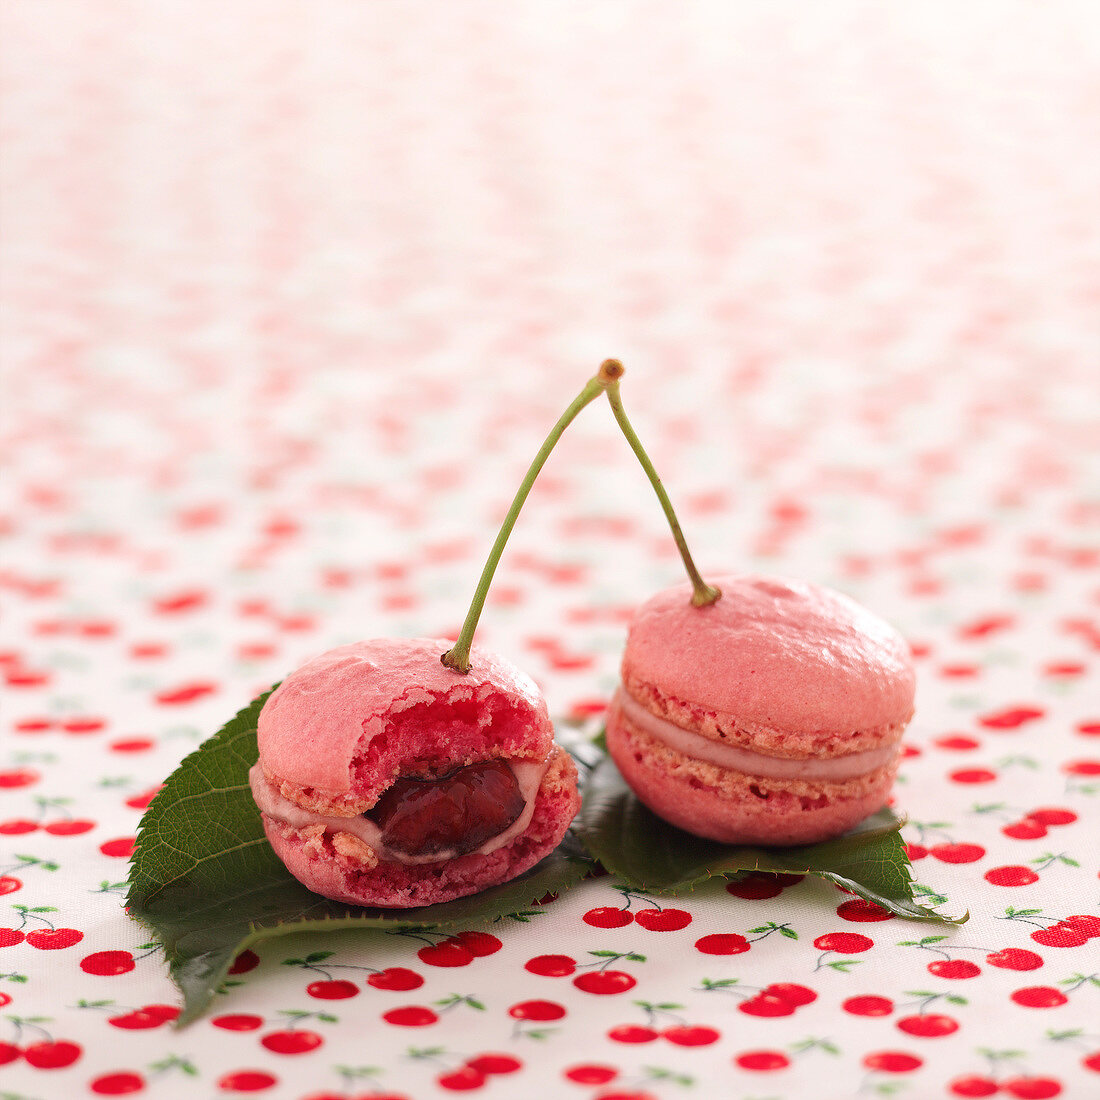 Sour griotte cherry and cinnamon macaroons